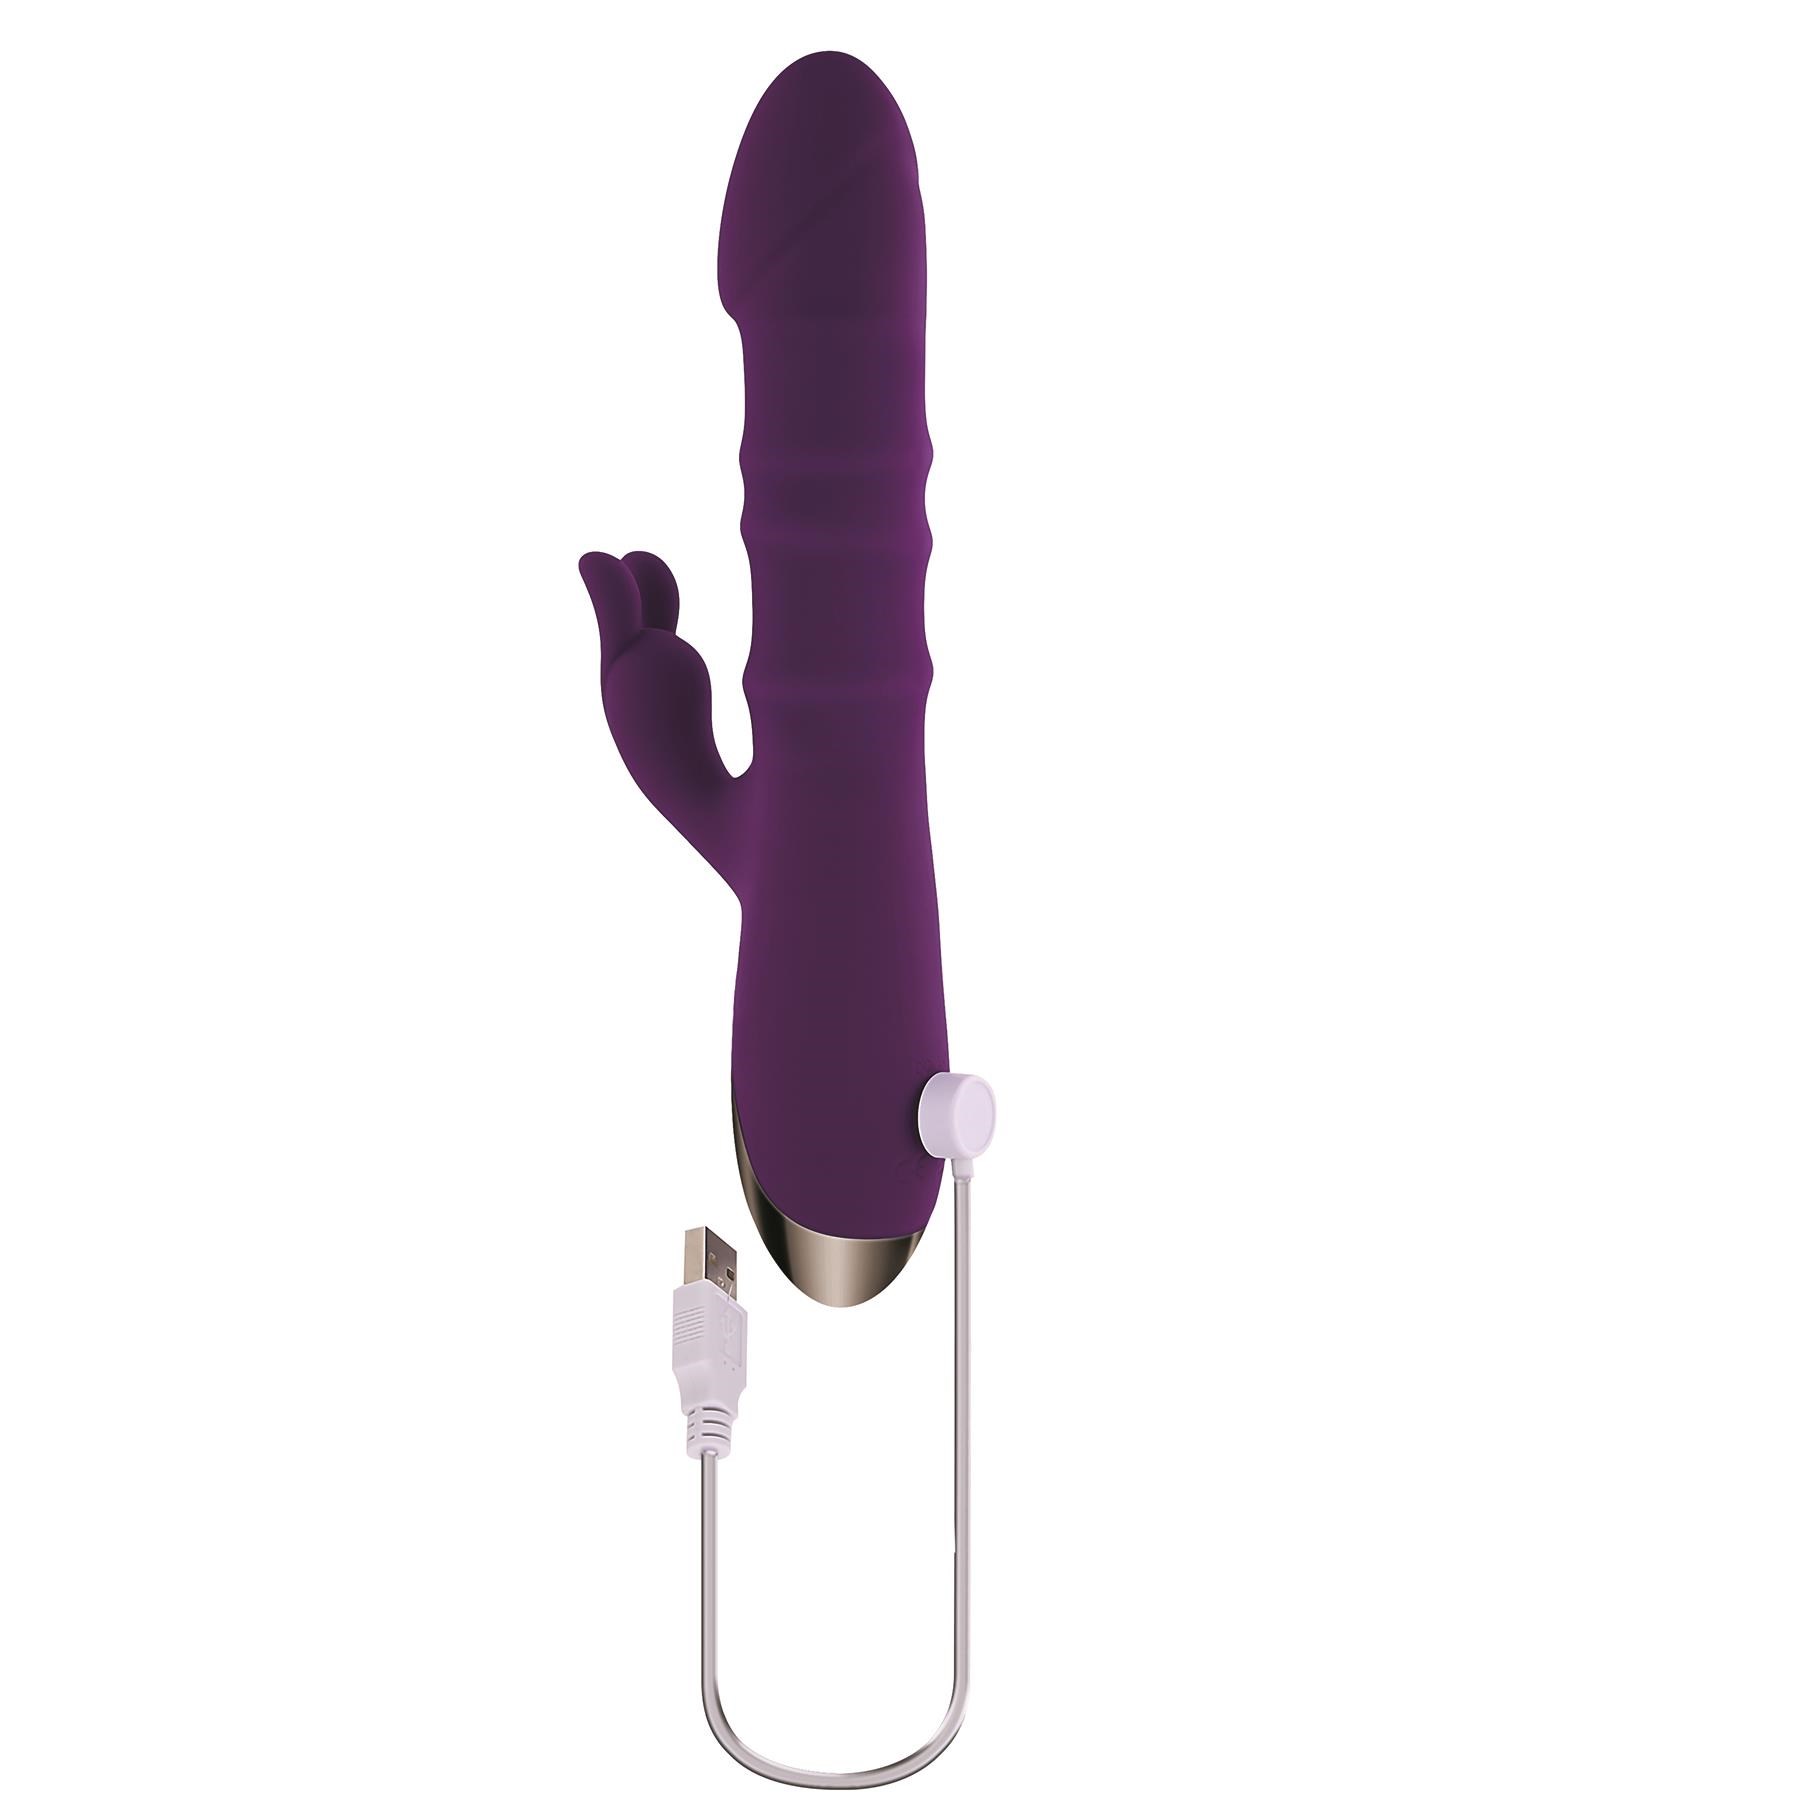 Playboy Pleasure Hop To It Rabbit Massager With Rolling Rings-Showing Where Charging Cable is Placed